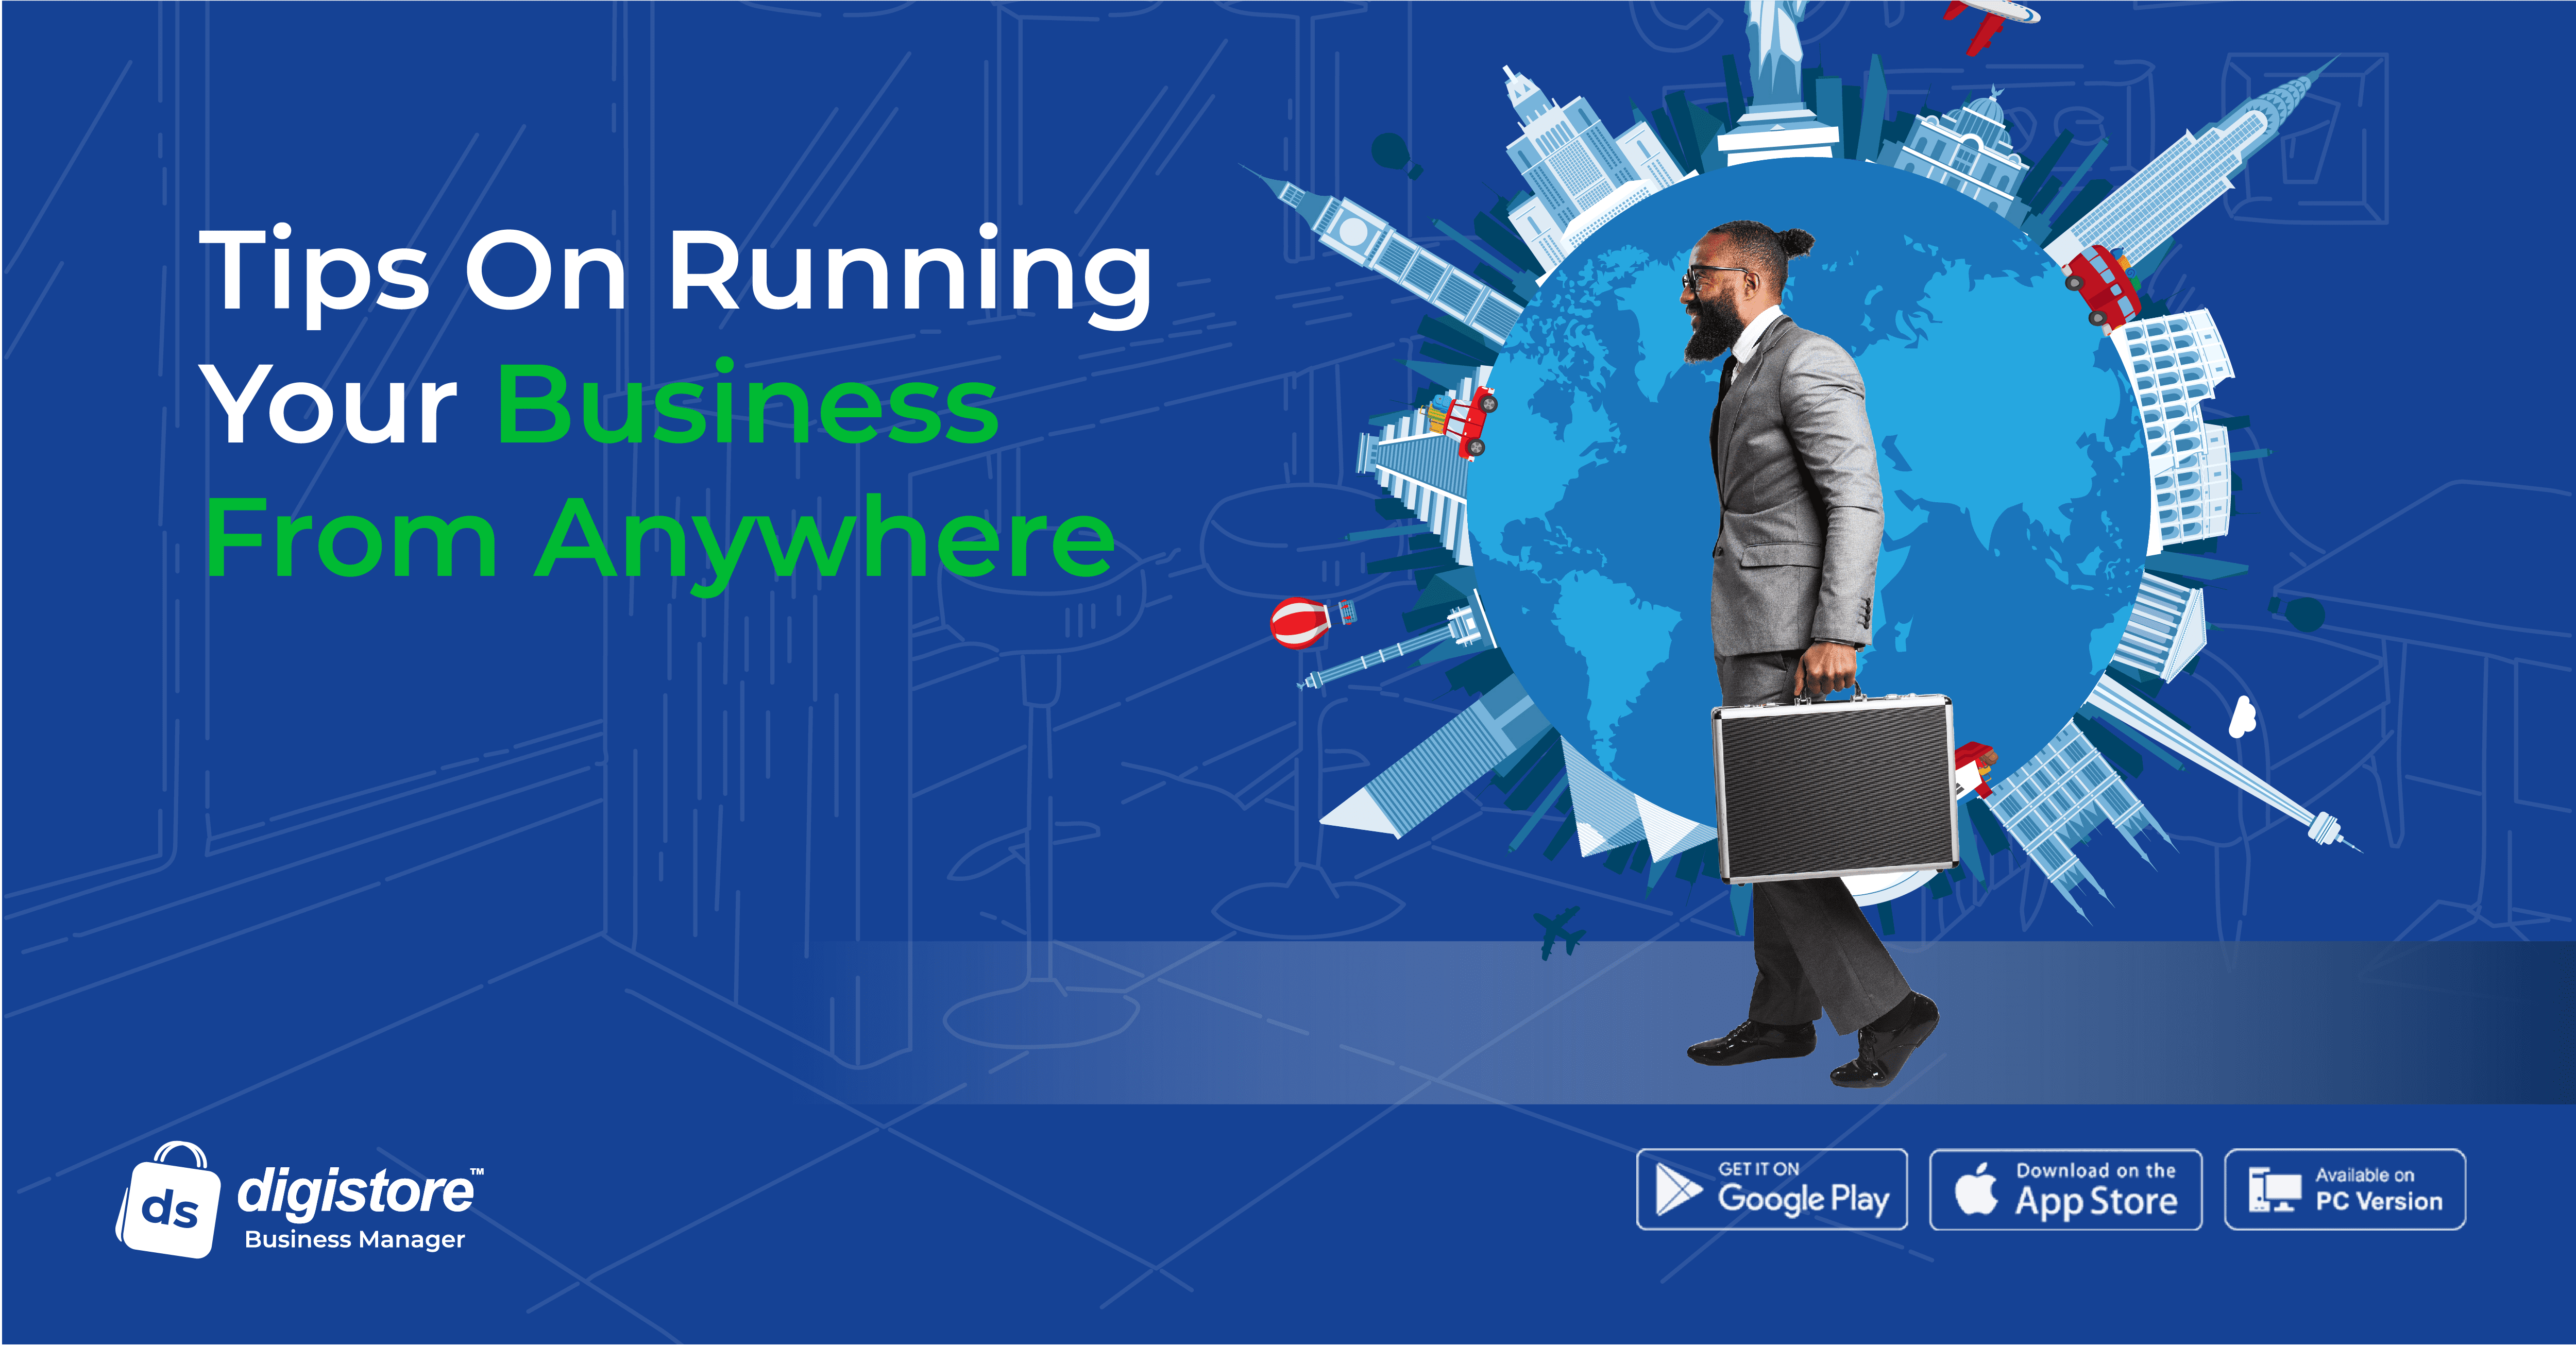 Tips on running business from anywhere banner with man in suit with a suitcase